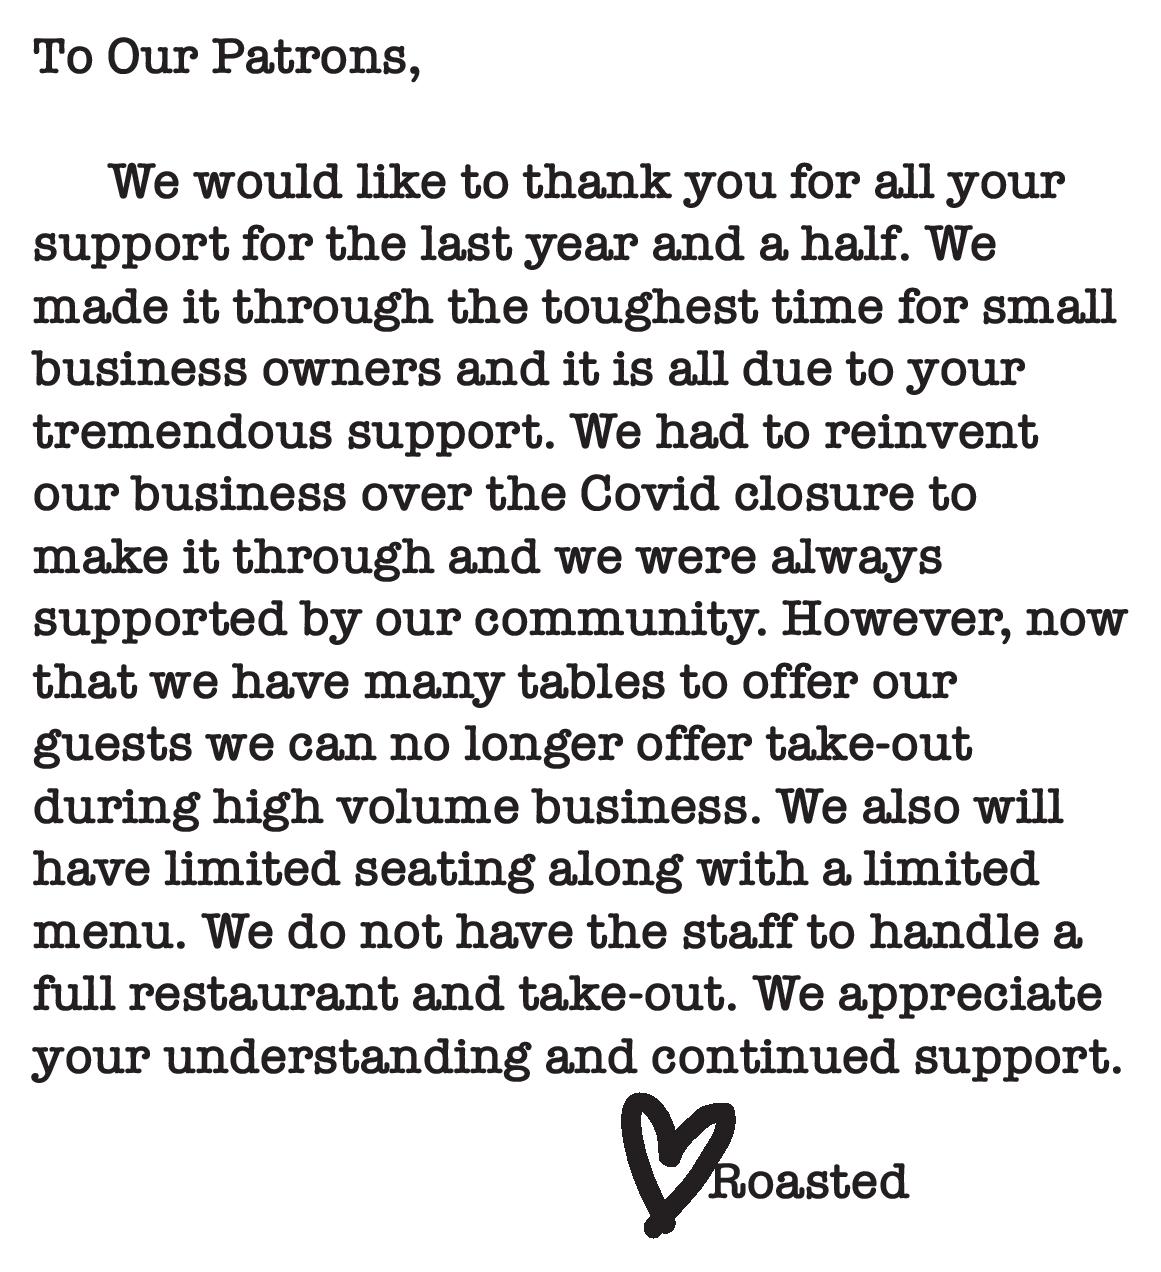 To Our Patrons, We would like to thank you for all your
support for the last year and a half. We
made it through the toughest time for small
business owners and it is all due to your
tremendous support. We had to reinvent
our business over the Covid closure to
make it through and we were always
supported by our community. However, now
that we have many tables to offer our
guests we can no longer offer take-out
during high volume business. We also will
have limited seating along with a limited
menu. We do not have the staff to handle a
full restaurant and take-out. We appreciate
your understanding and continued support. Roasted